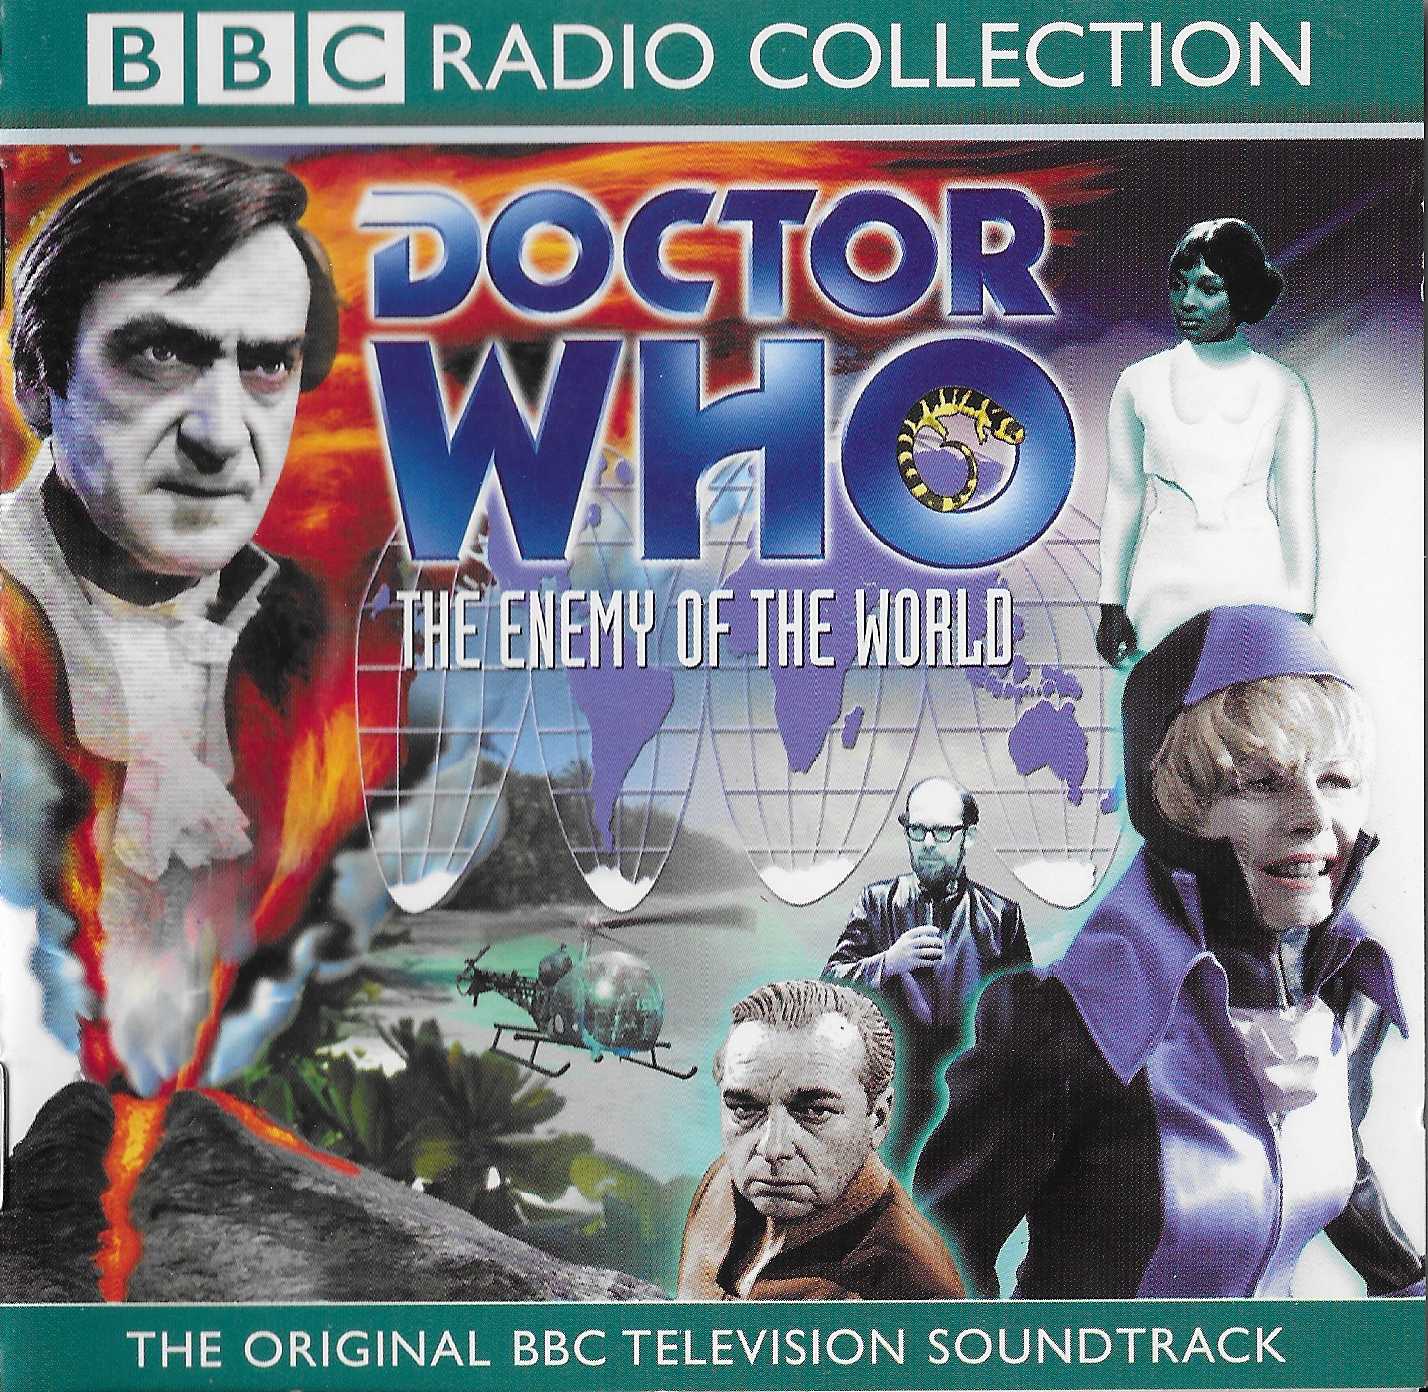 Picture of ISBN 0-563-53503-2 Doctor Who - The enemy of the world by artist David Whitaker from the BBC cds - Records and Tapes library